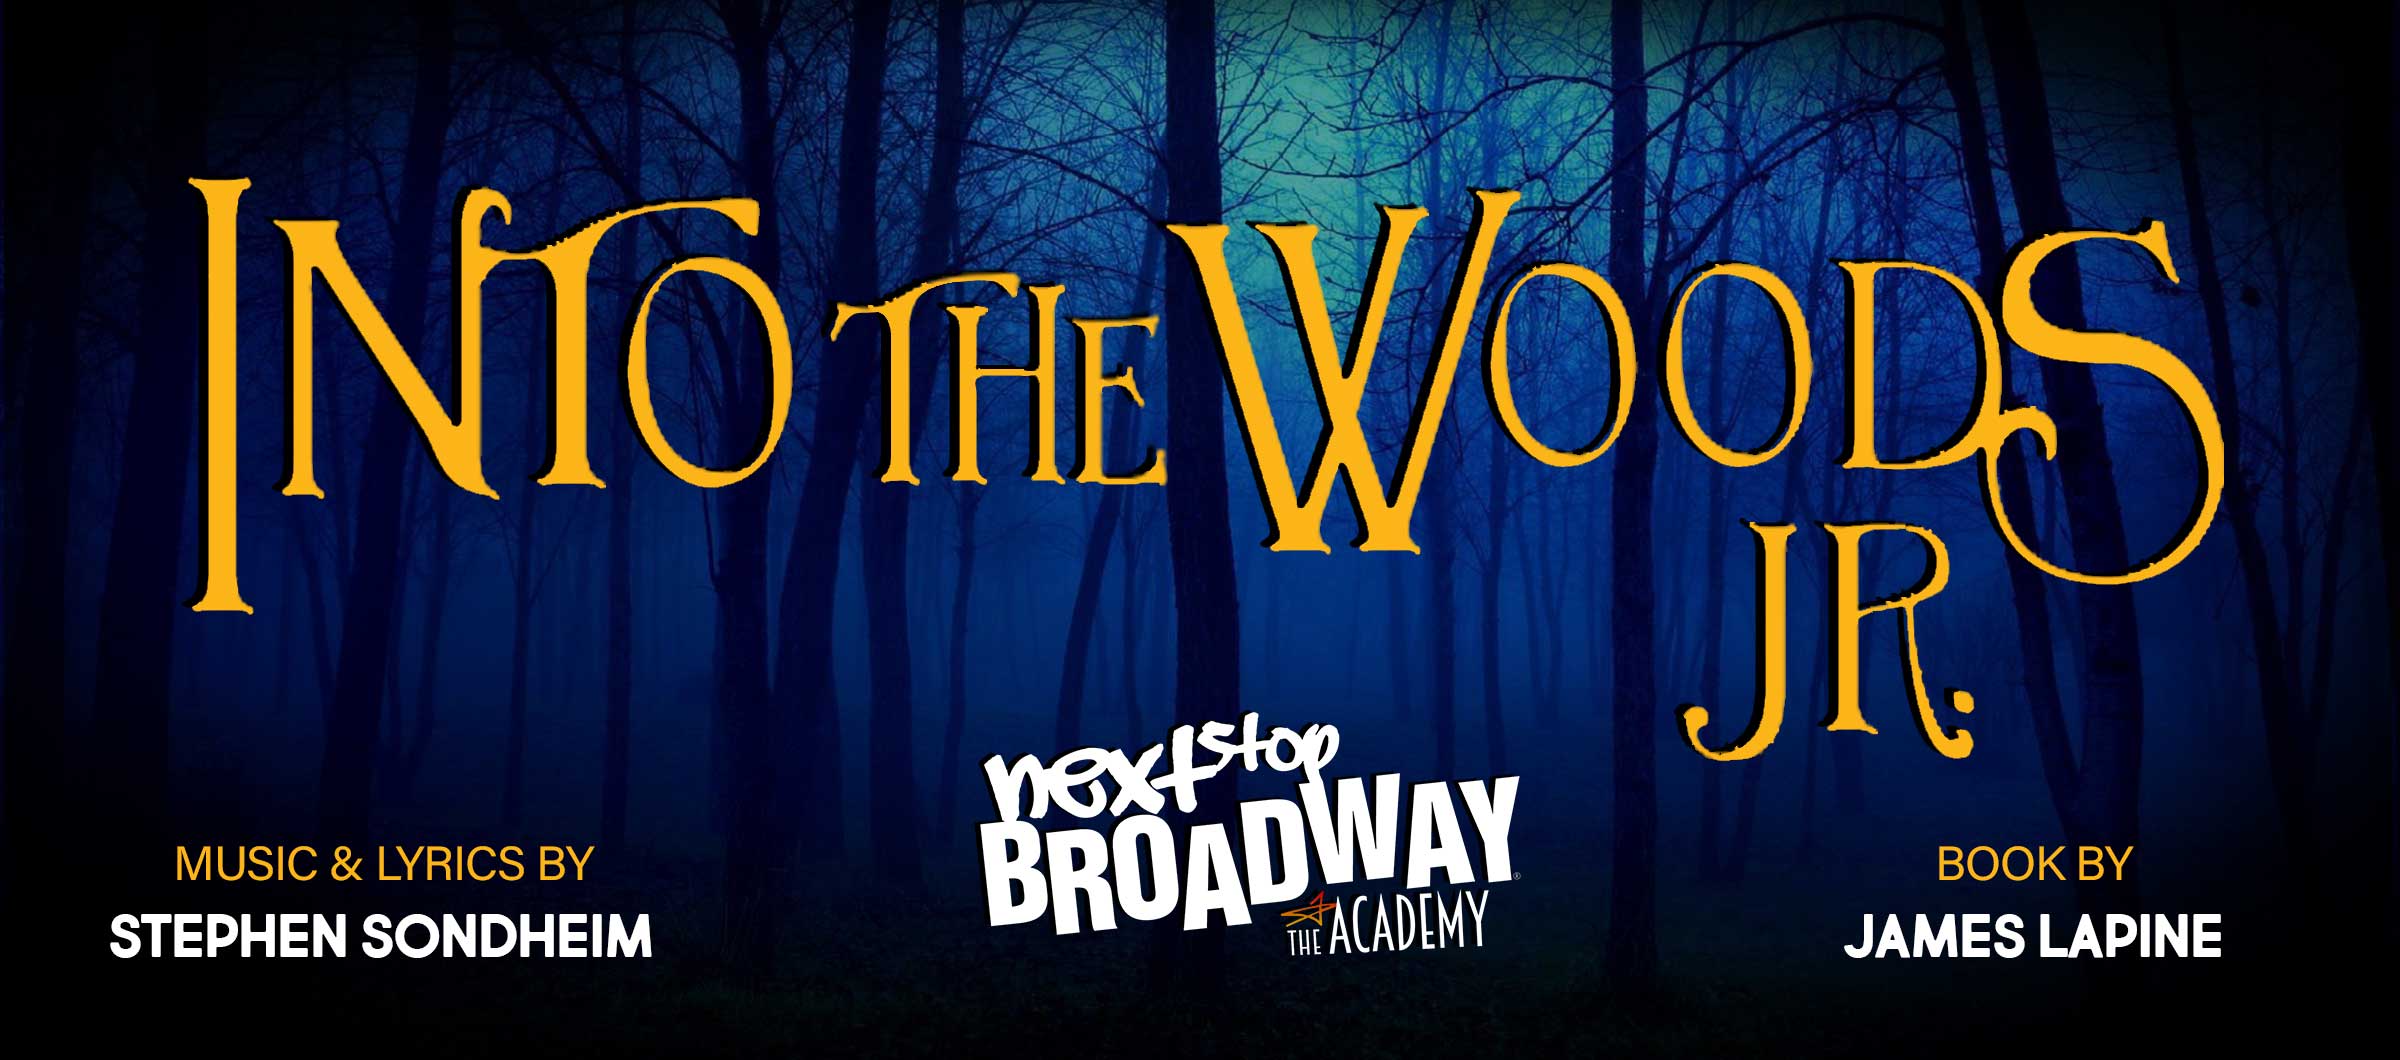 Next Stop Broadway presents Into the Woods Jr.